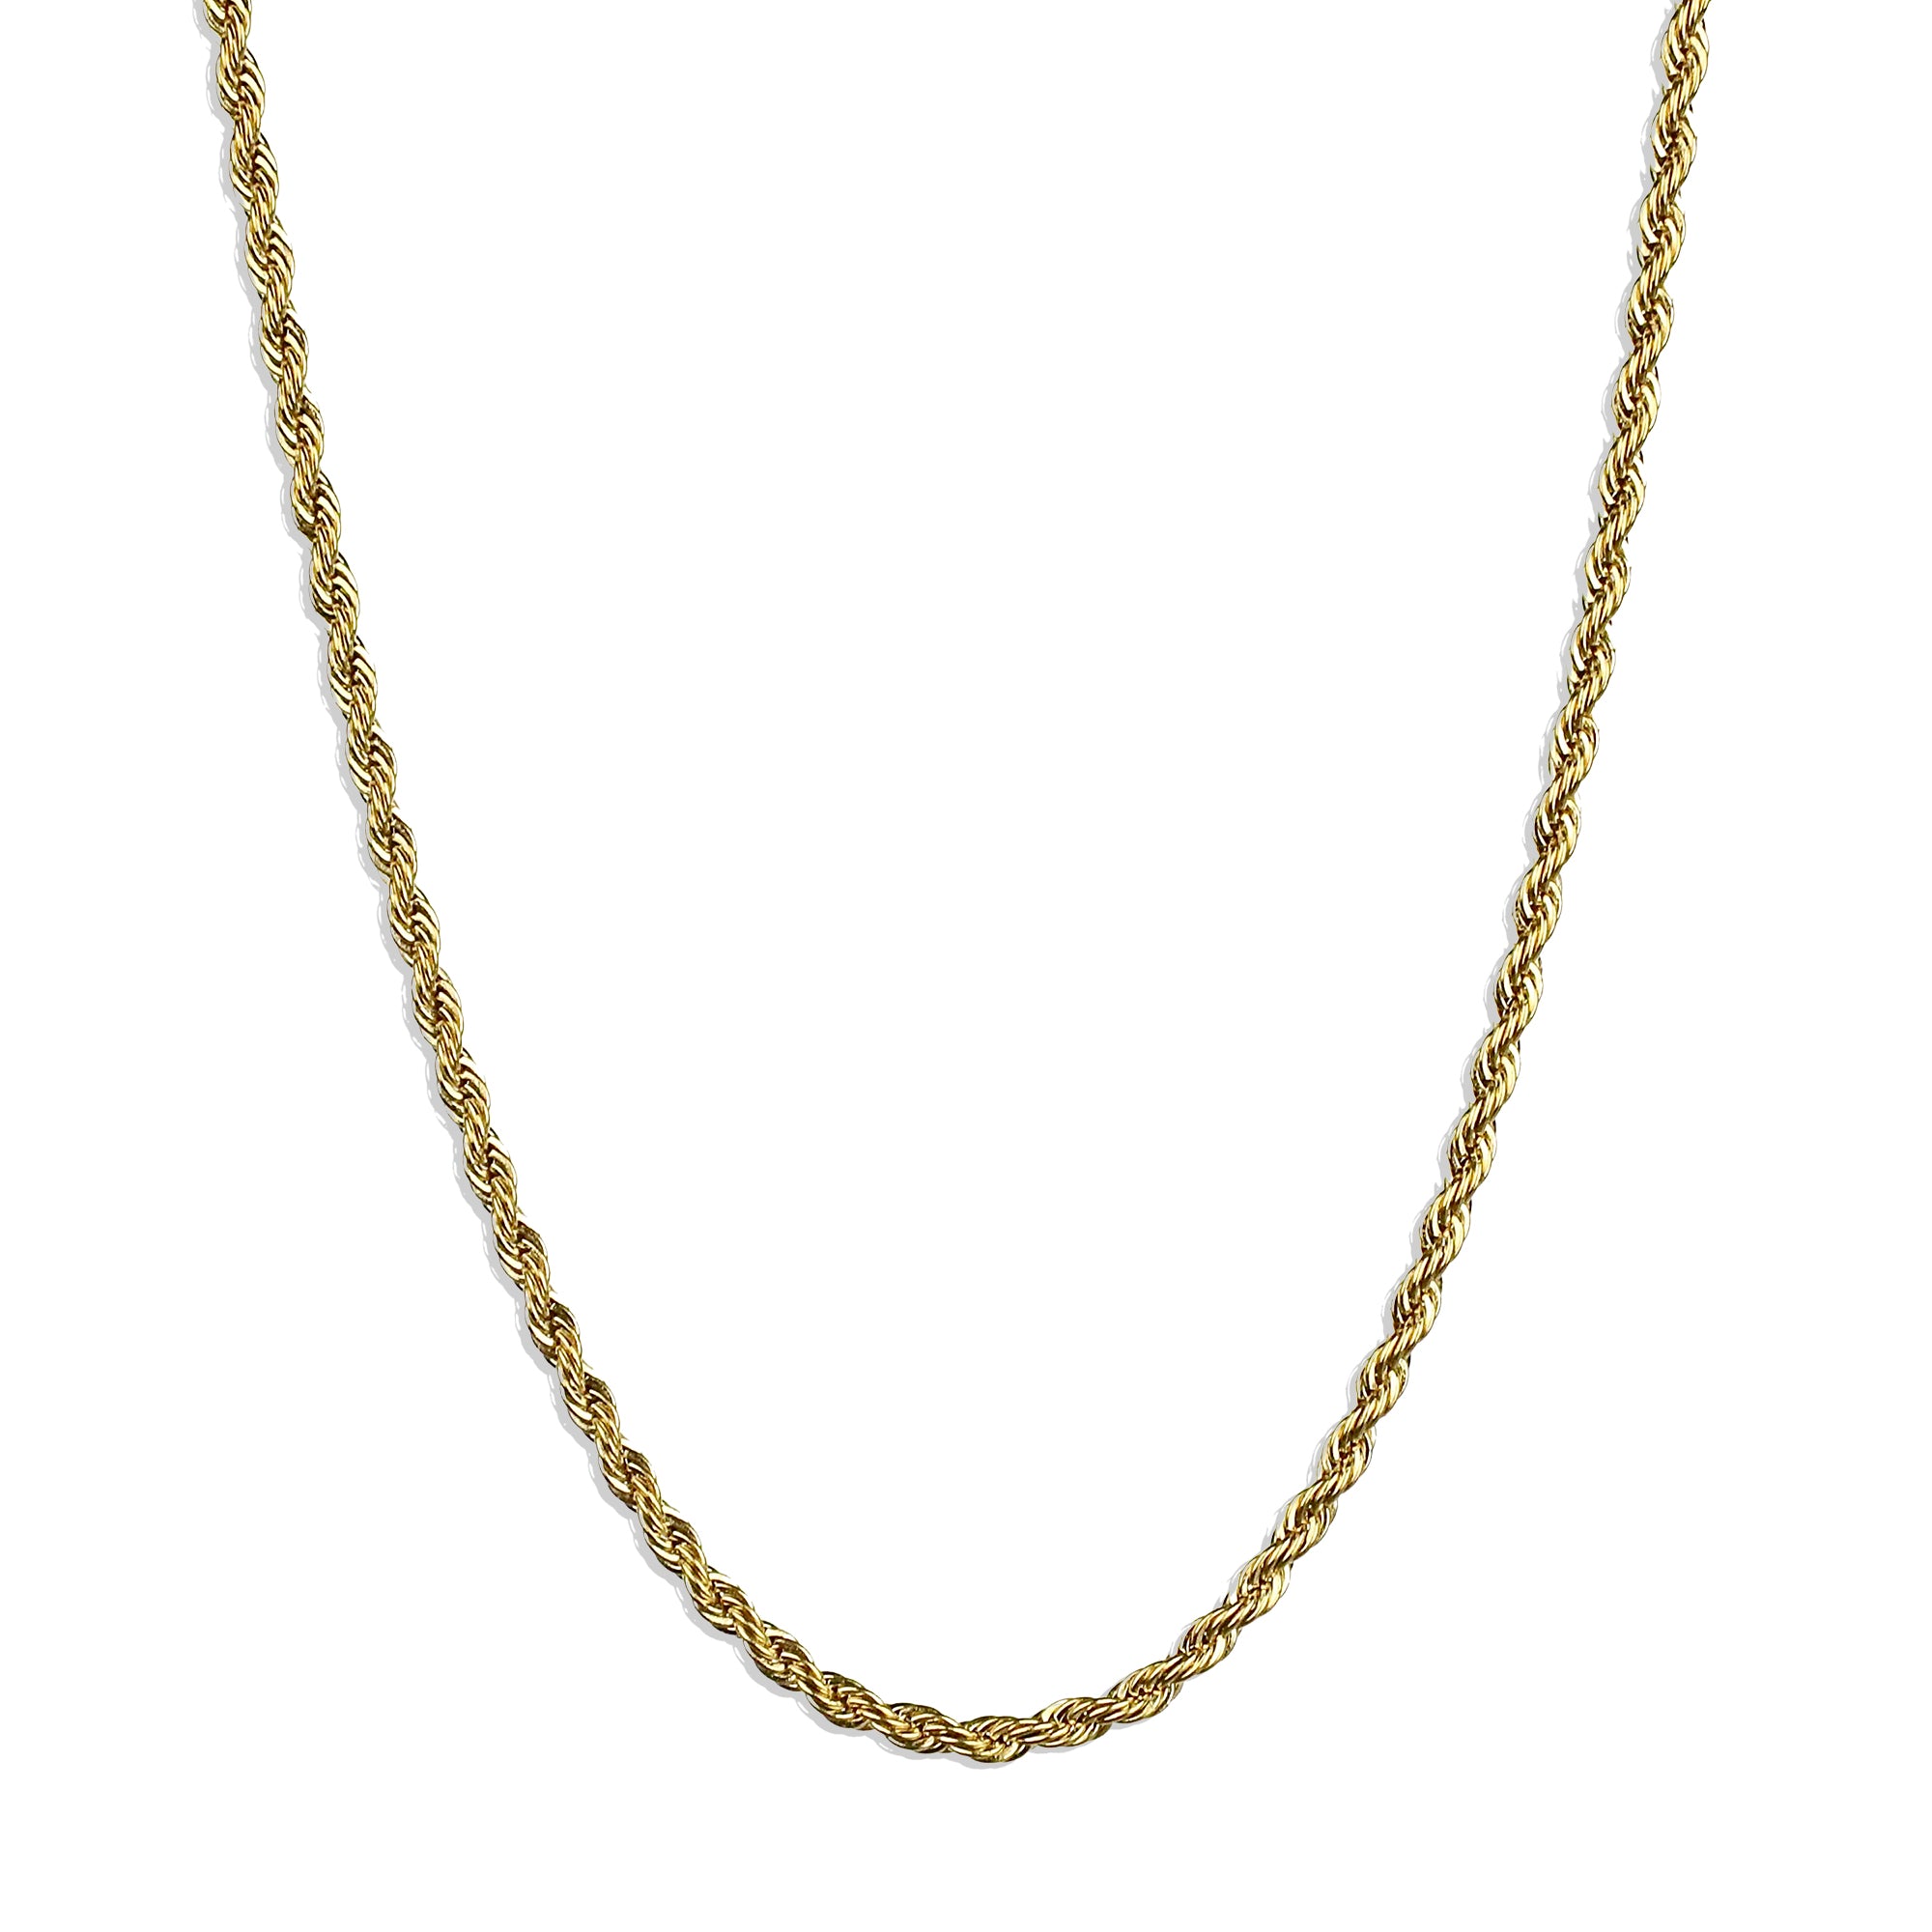 Rope Chain Necklace - Gold 2.5mm